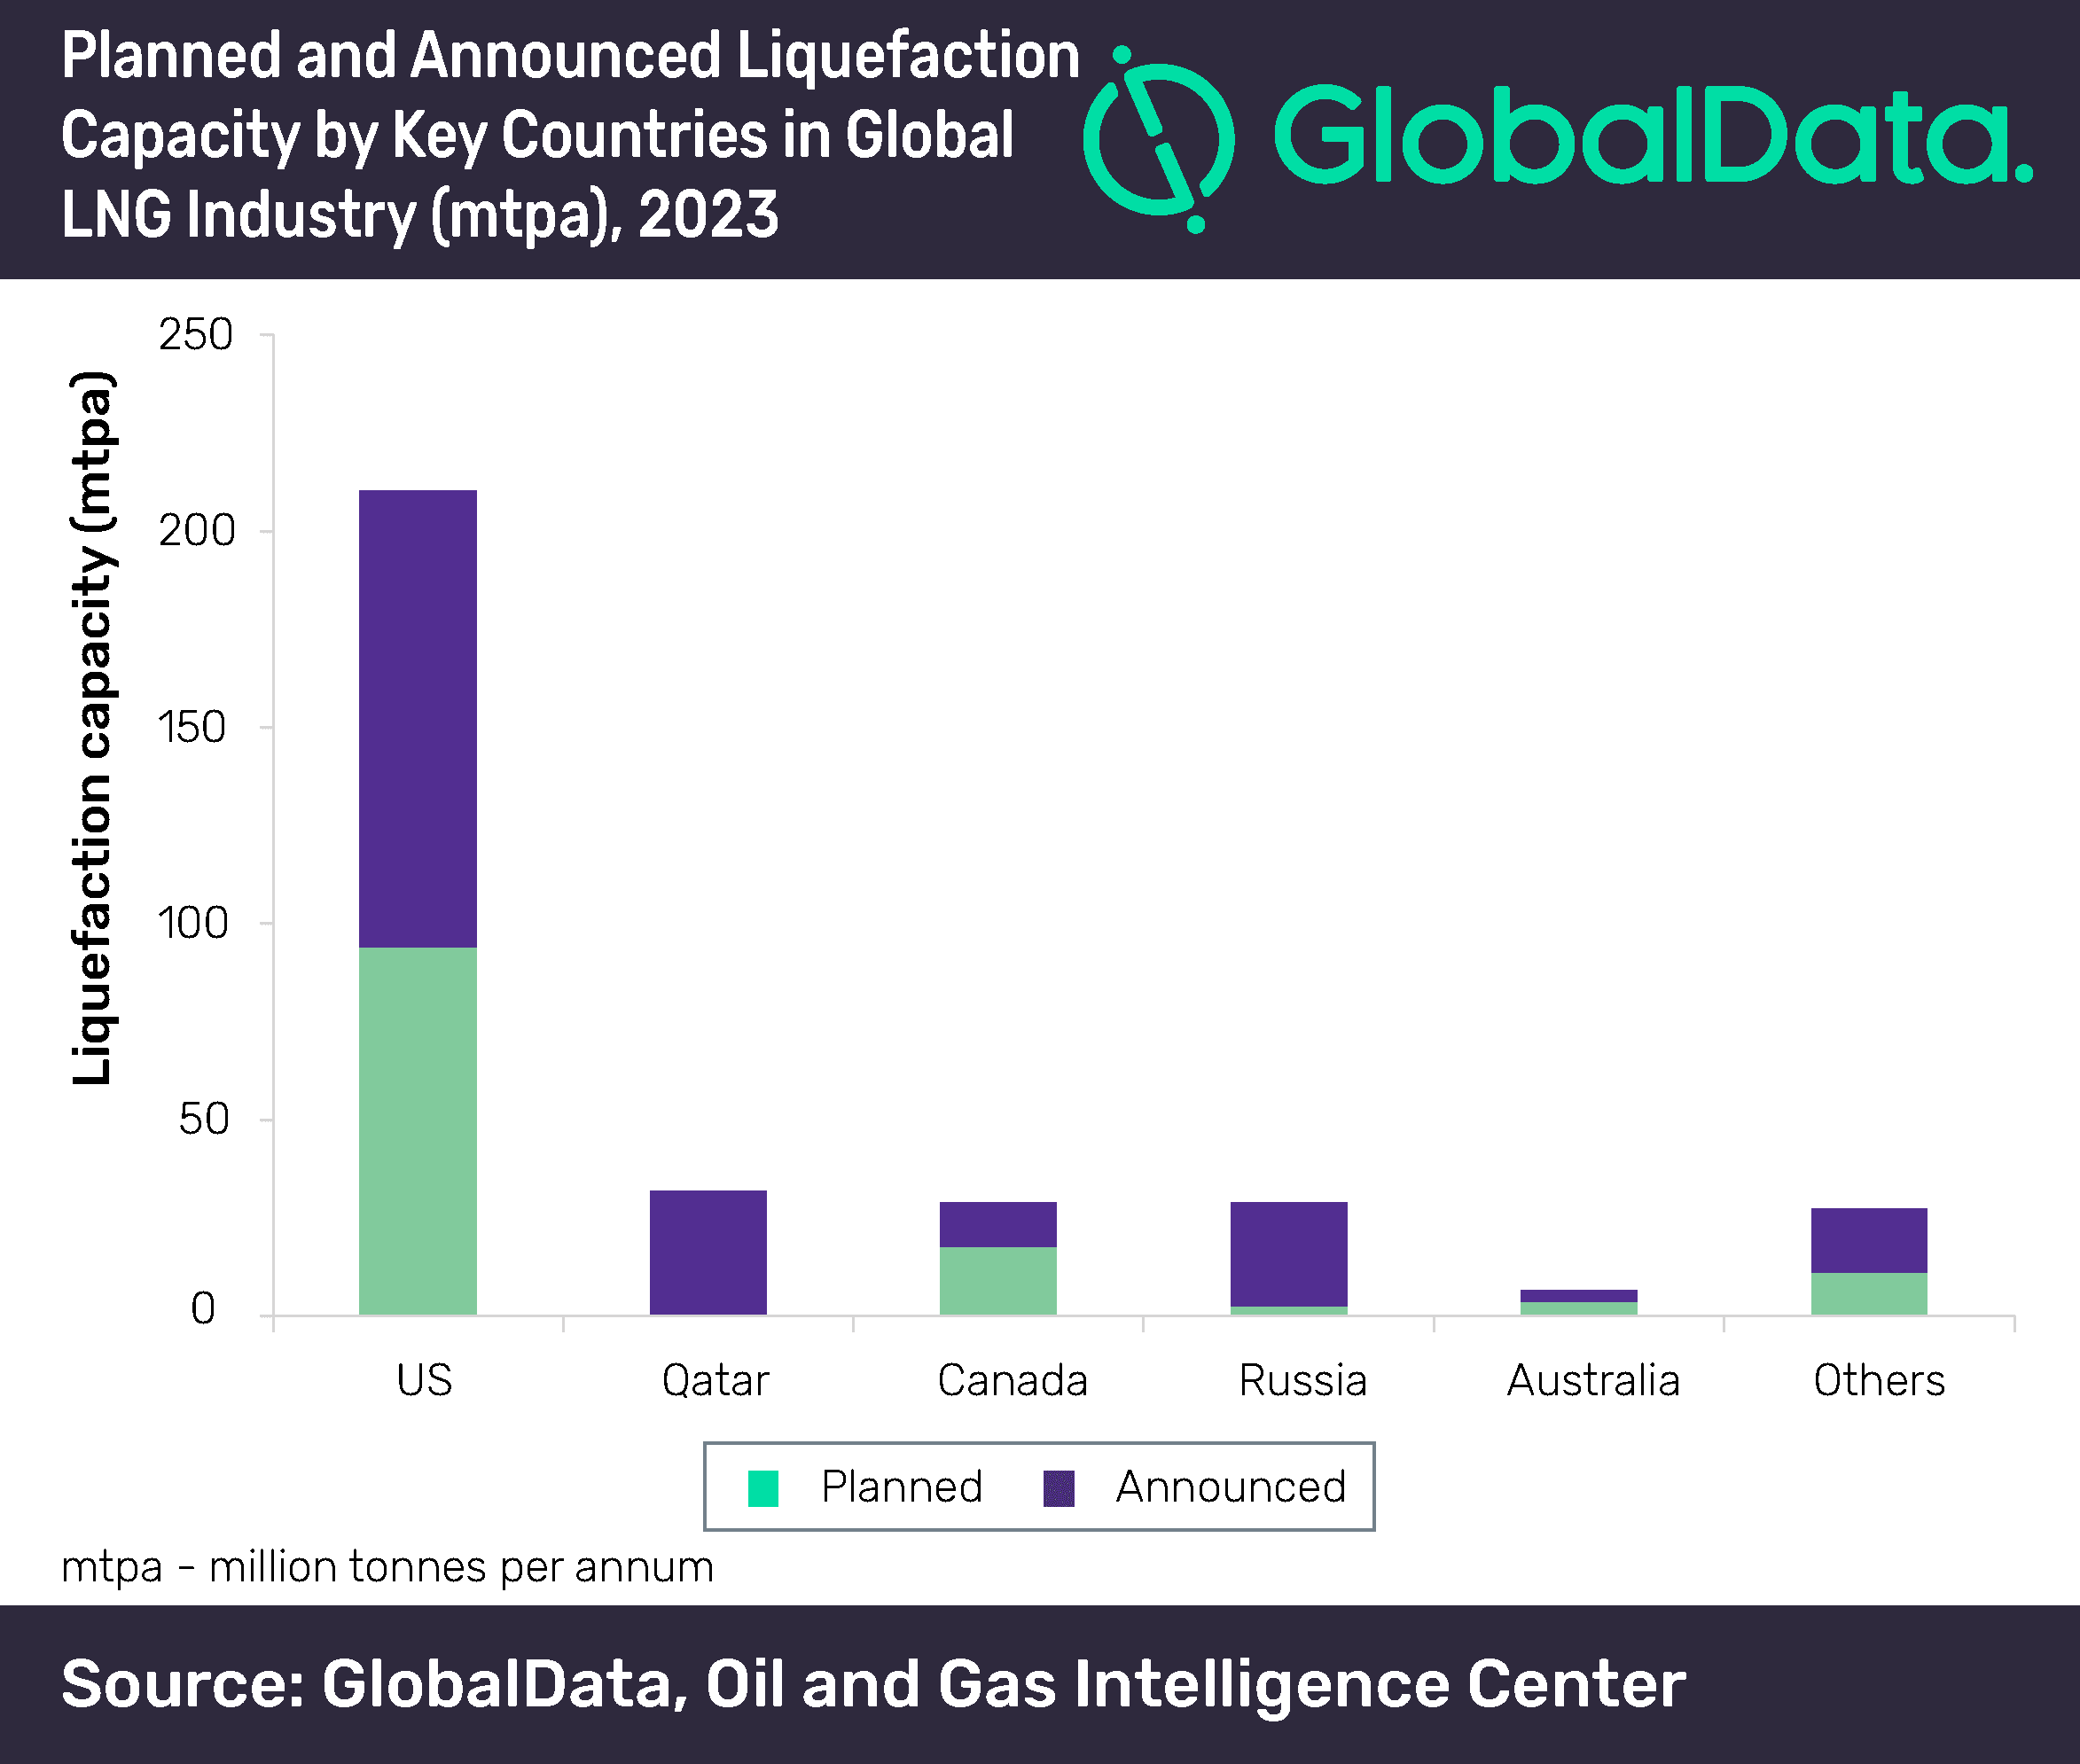 US and India lead new-build capacity growth in global LNG liquefaction and regasification industries